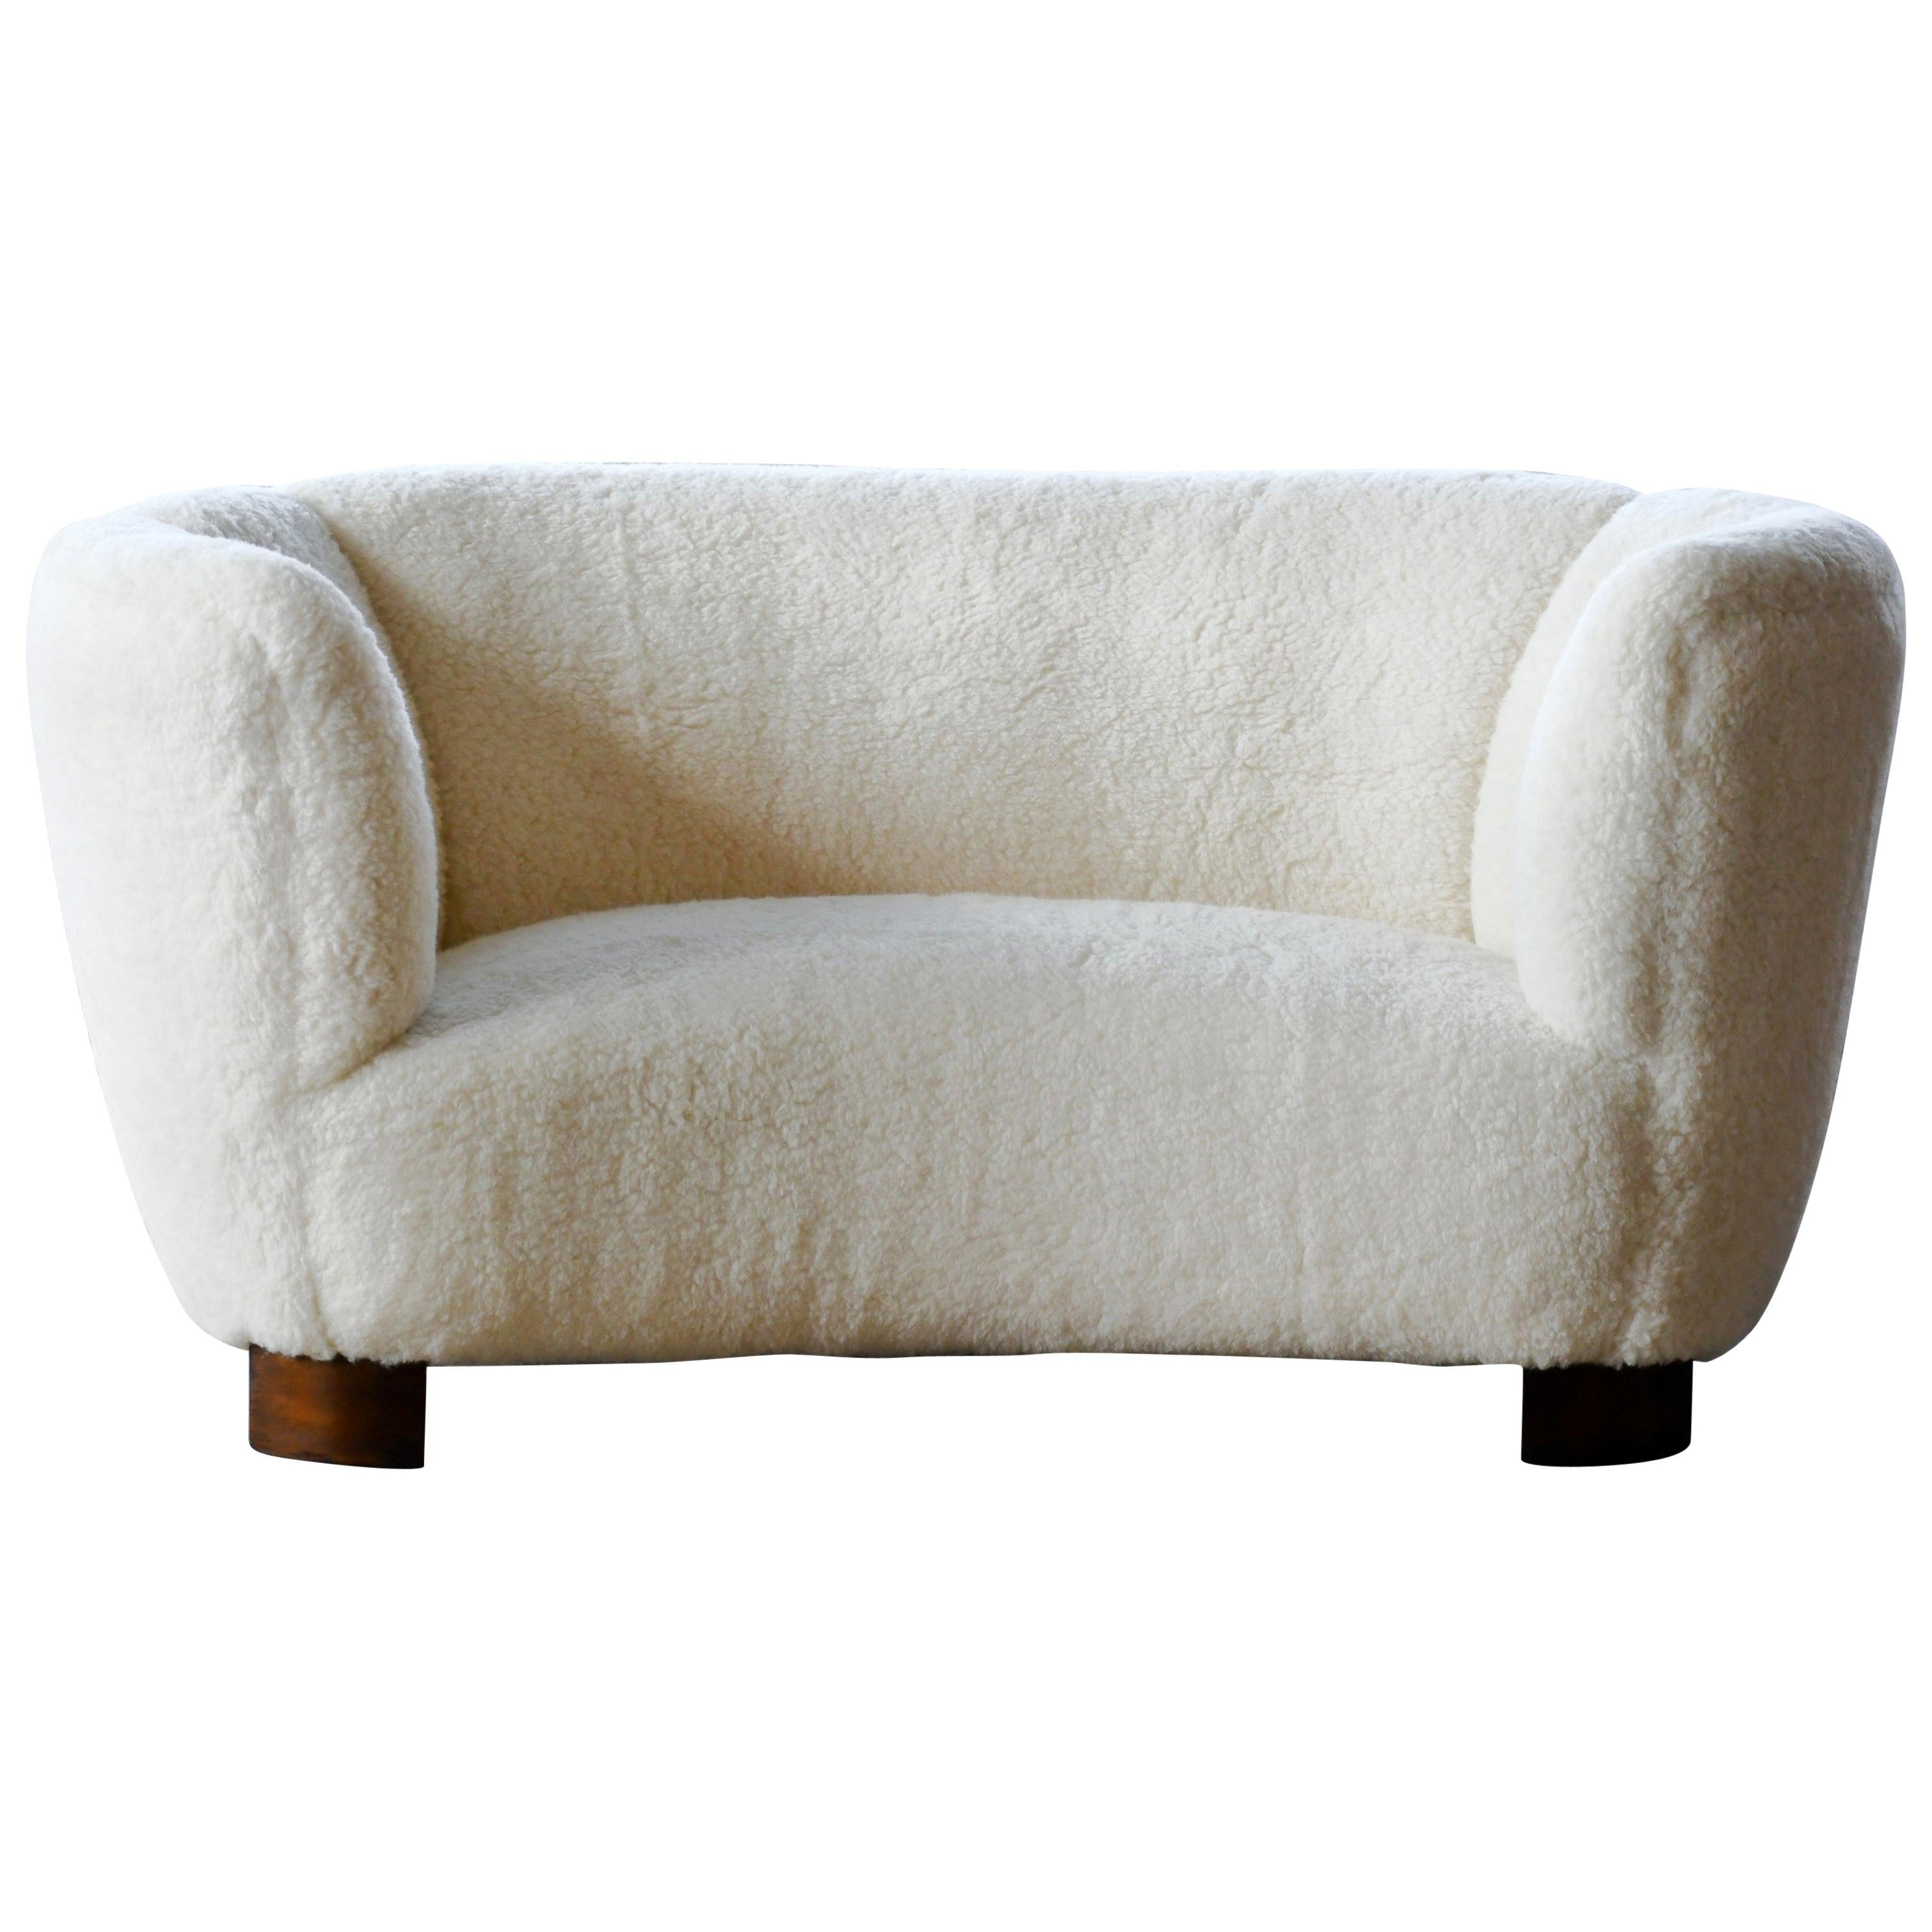 Lambswool Covered Banana Shaped Curved Loveseat, Denmark, 1940s